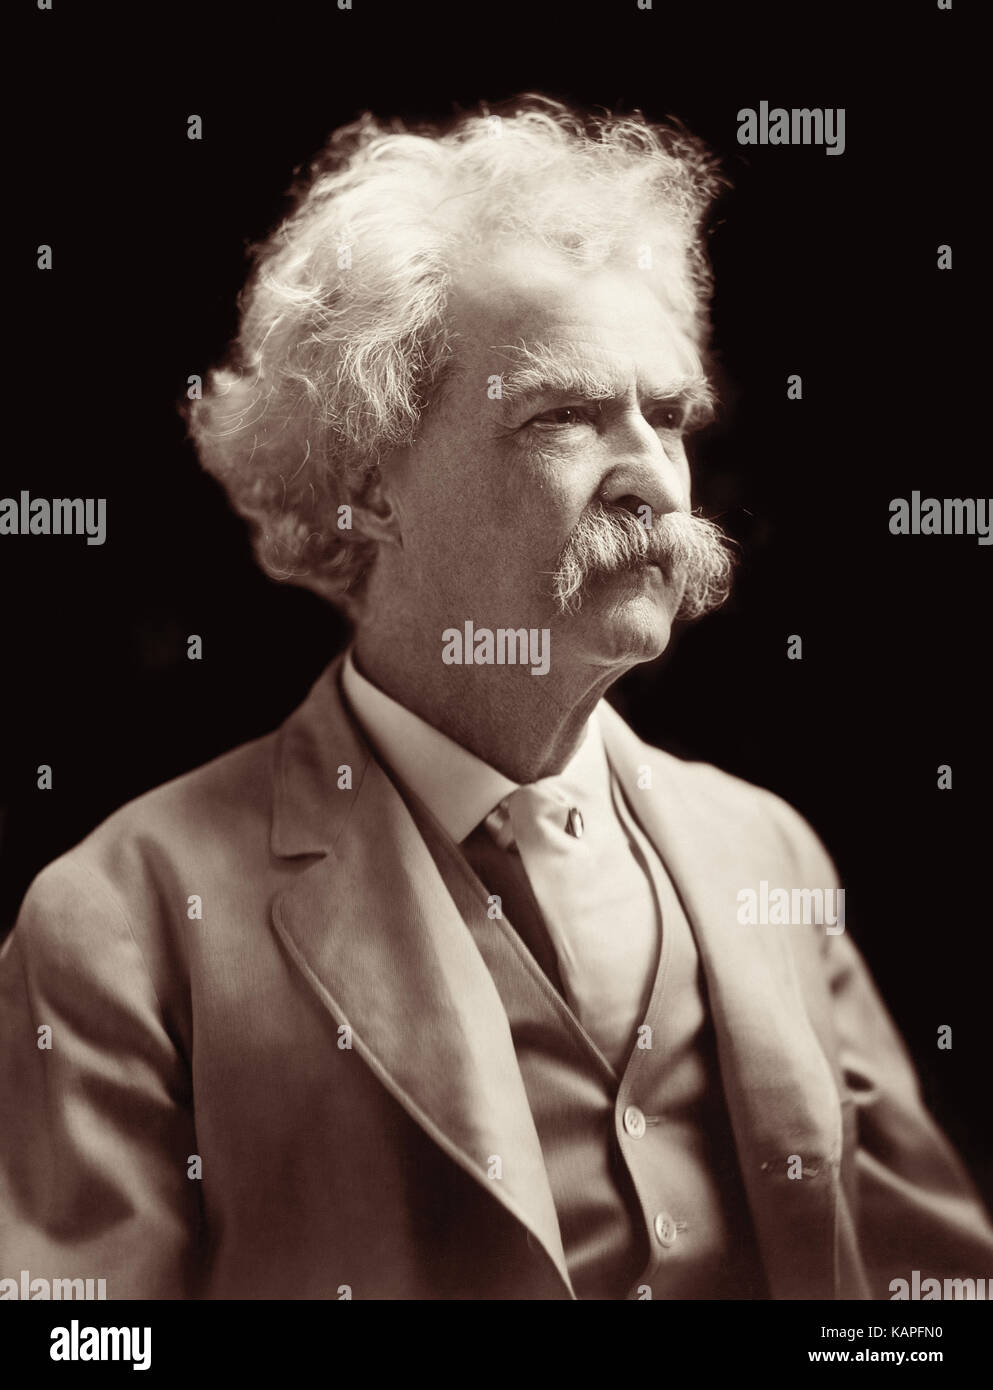 Mark Twain (pen name for humorist and writer Samuel Langhorne Clemens) in a 1909 studio portrait by A.F. Bradley in New York City. Stock Photo